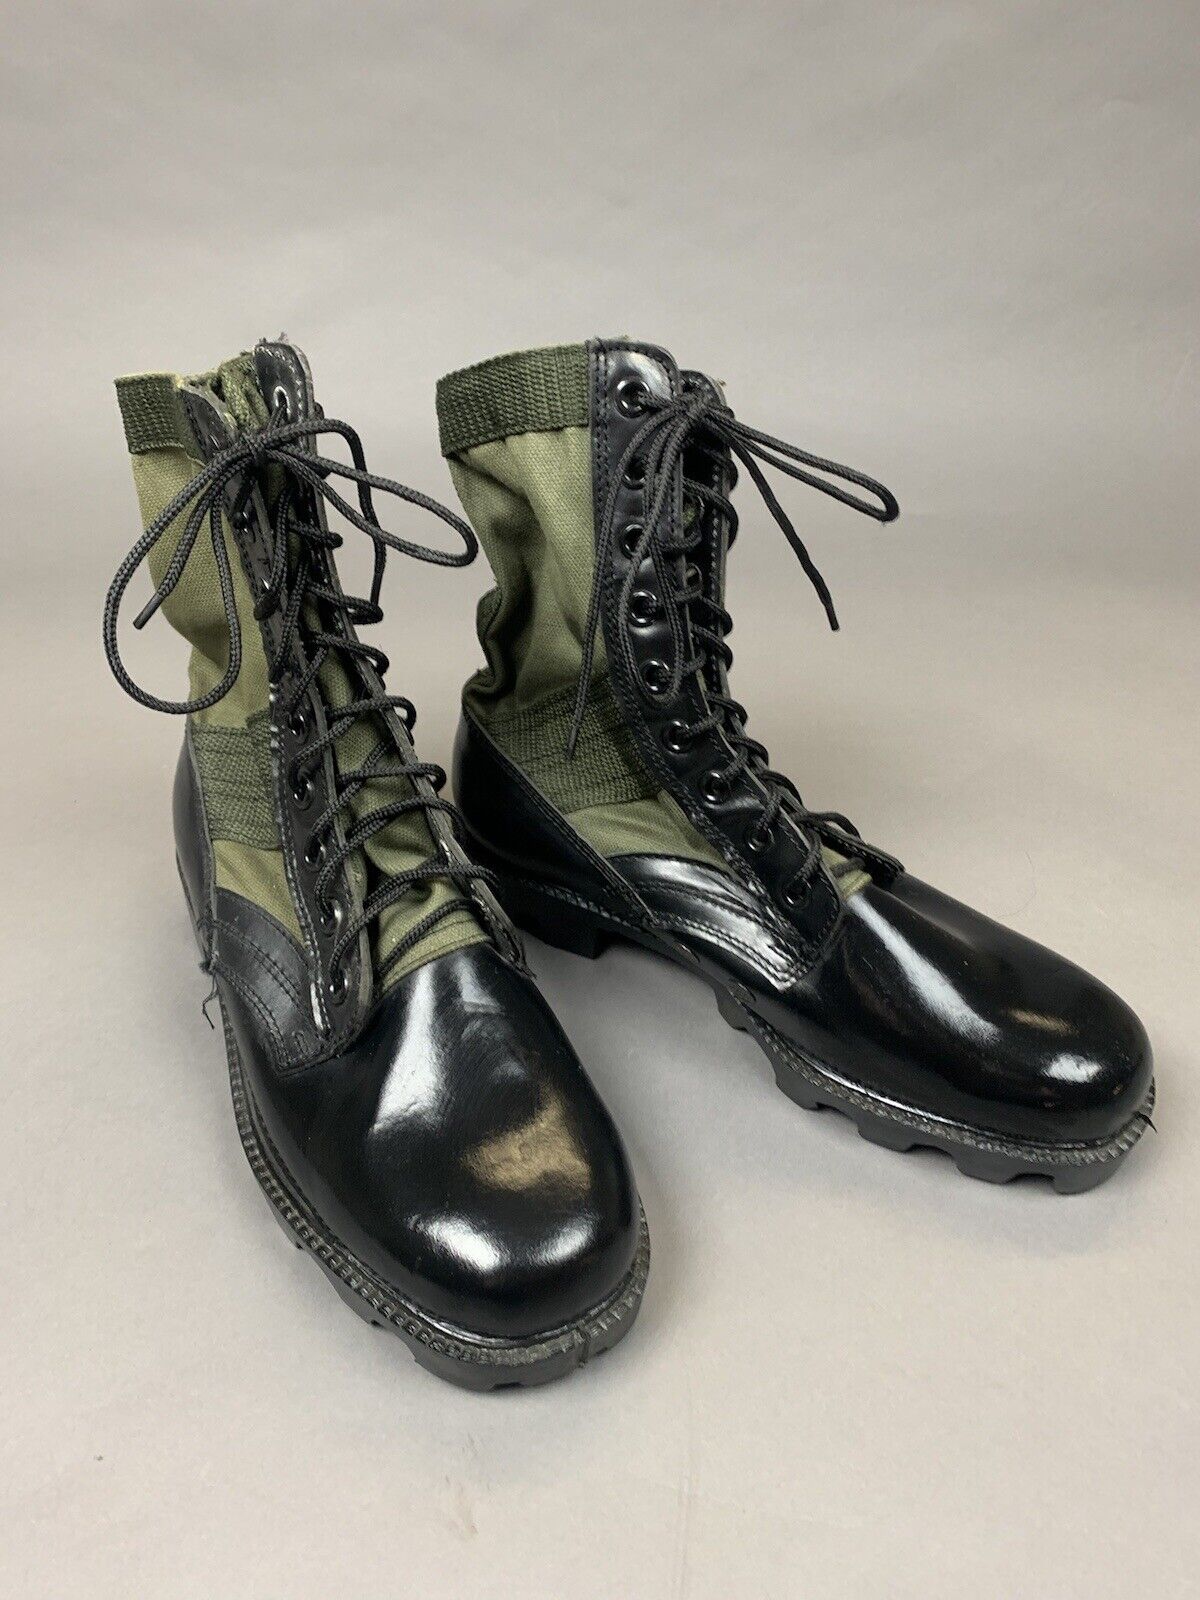 USGI US ARMY JUNGLE HOT WEATHER BOOTS - SIZE 9R Puncture Resistant Well Polished